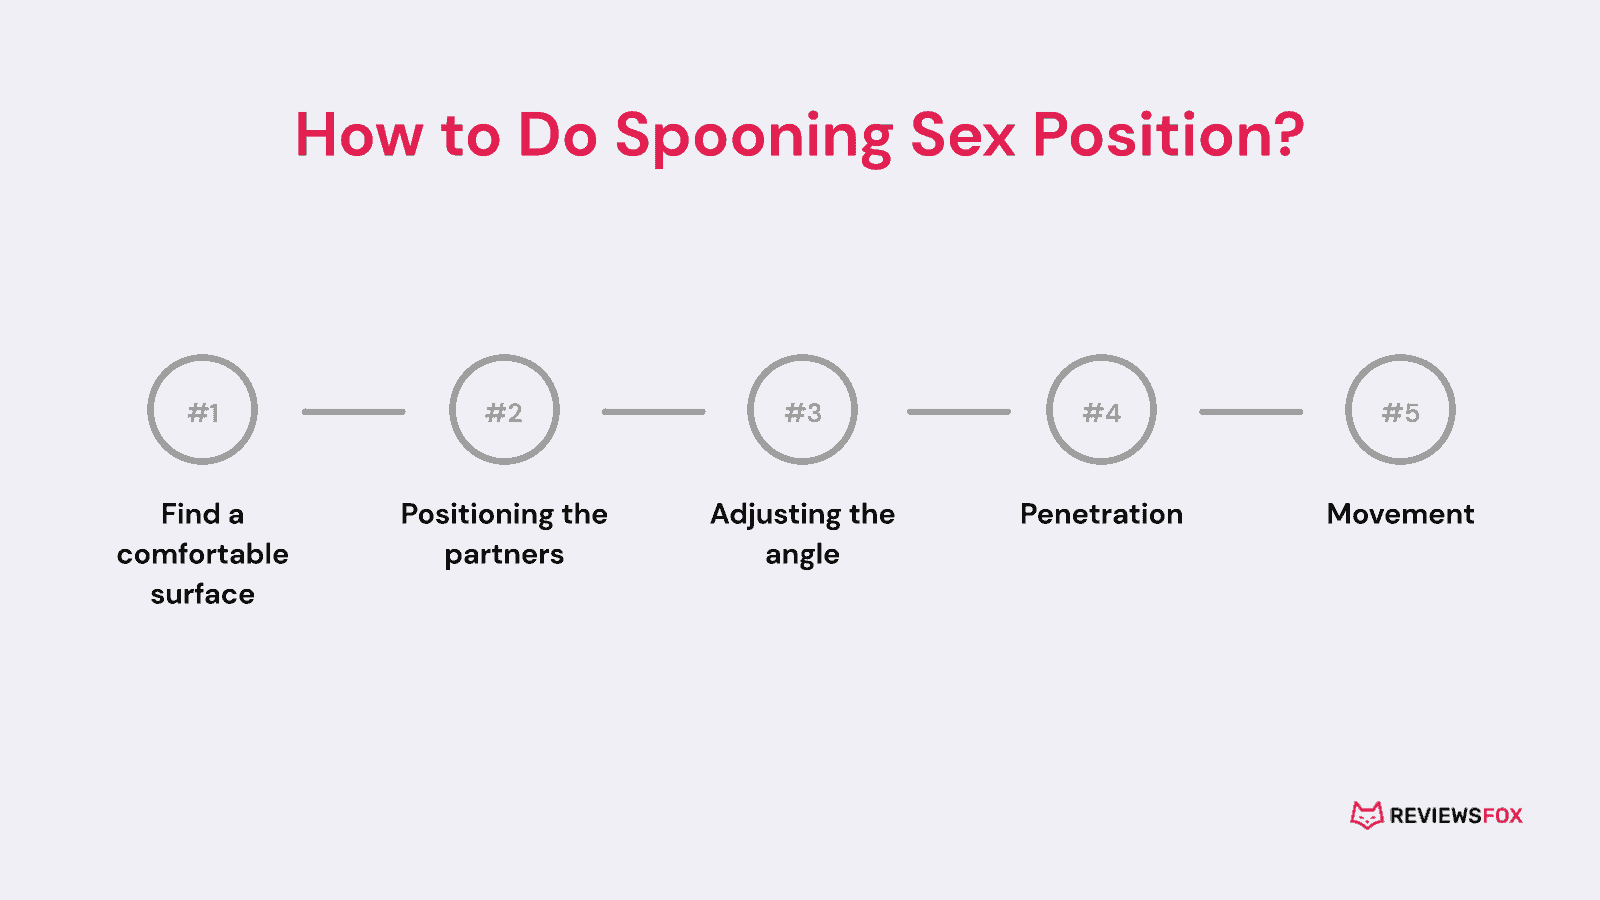 How to do Spooning sex position